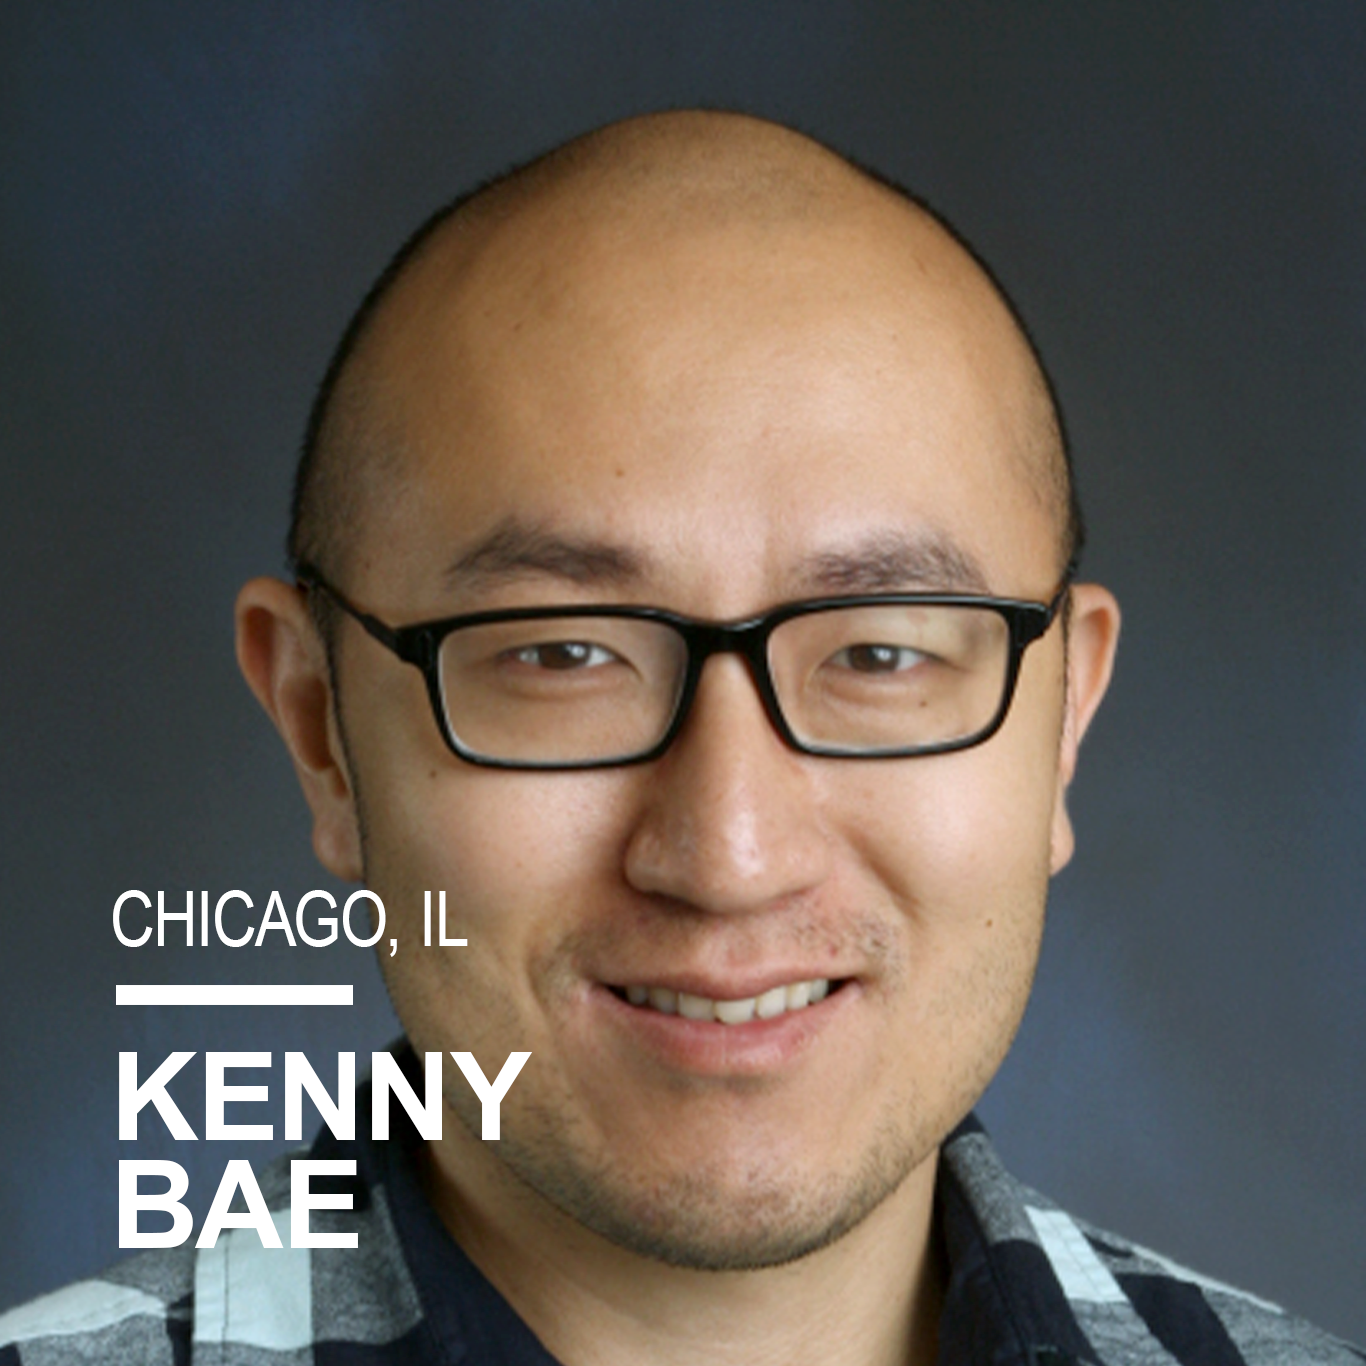 Kenny Bae is a faculty founder of and a STEAM teacher at Wolcott College Prep High School in Chicago, IL. He struggled in his early years of education, and has developed a passion for and lifelong goal of supporting underrepresented and disadvantaged students. During his 13 years in education, his work with students has been recognized by Forbes magazine, the Chicago Sun-Times, the US Department of Education, and more. He firmly believes today’s youth can accomplish amazing things if given a chance. He enjoys learning from his students and working with them to make the world a better place.